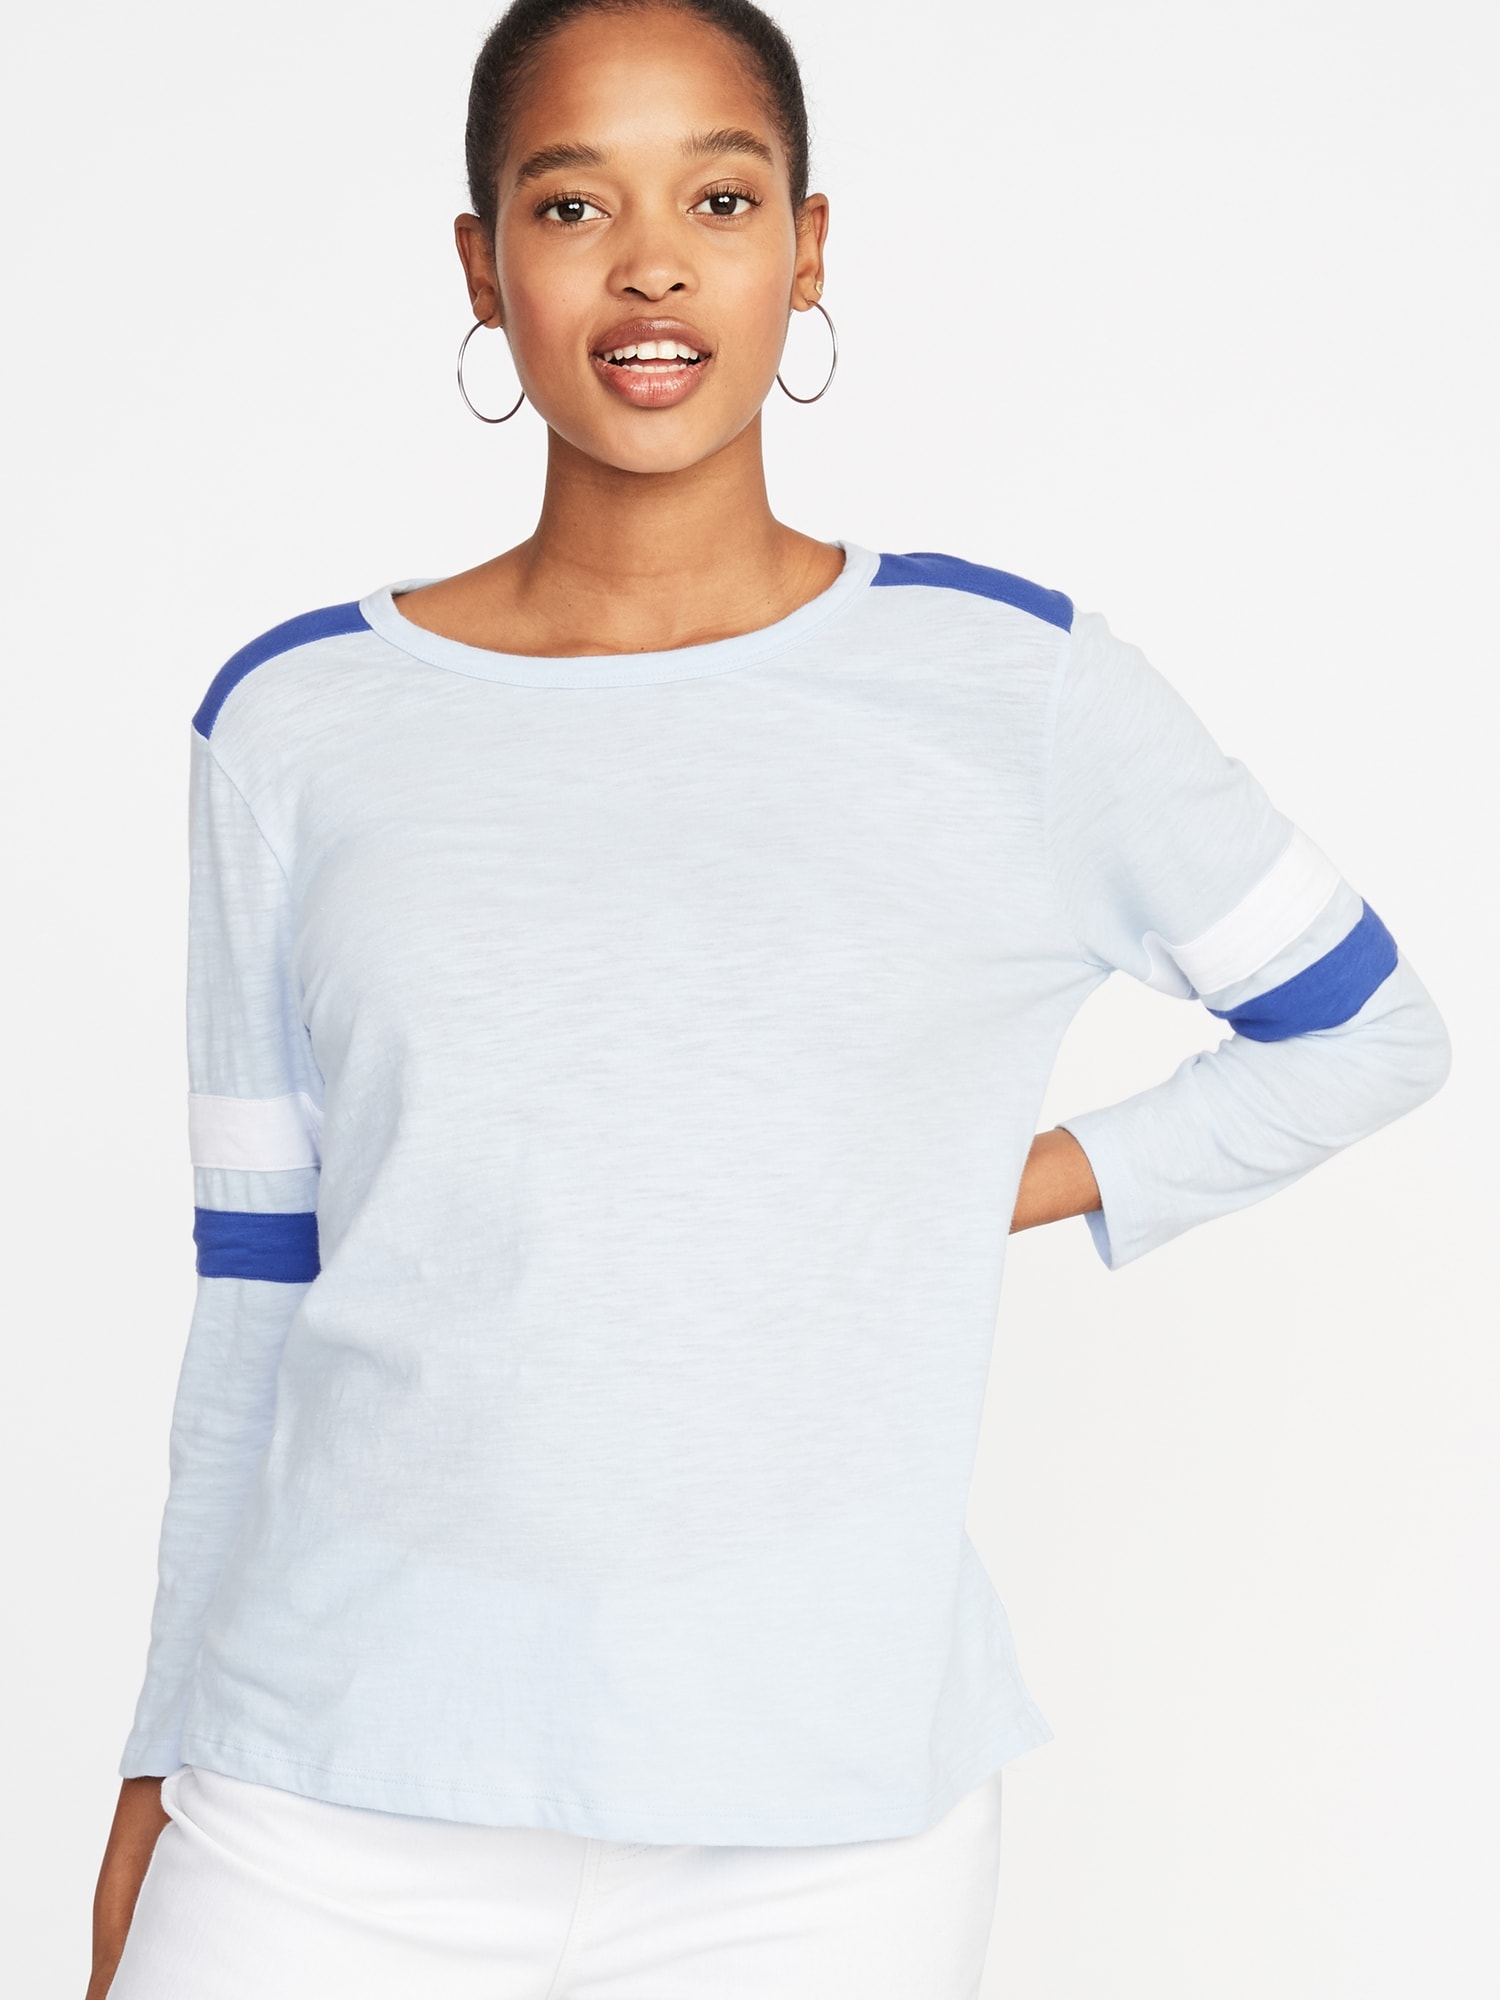 Relaxed Football-Style Slub-Knit Tee for Women | Old Navy